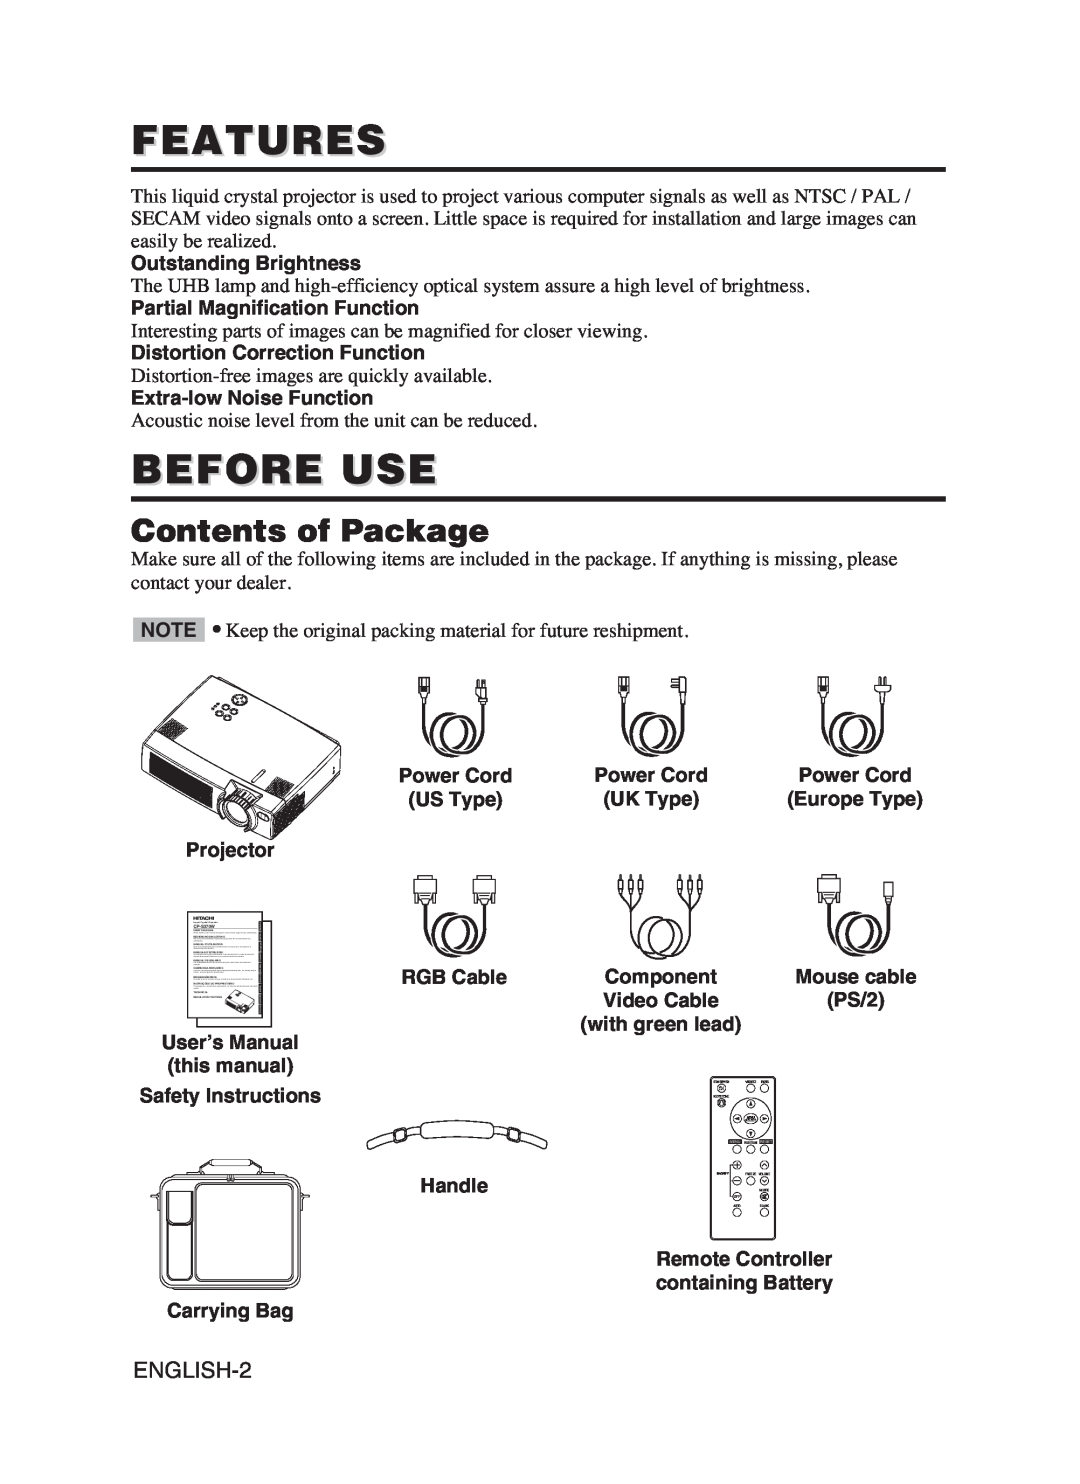 Hitachi CP-S370W user manual Features, Before Use, Contents of Package 